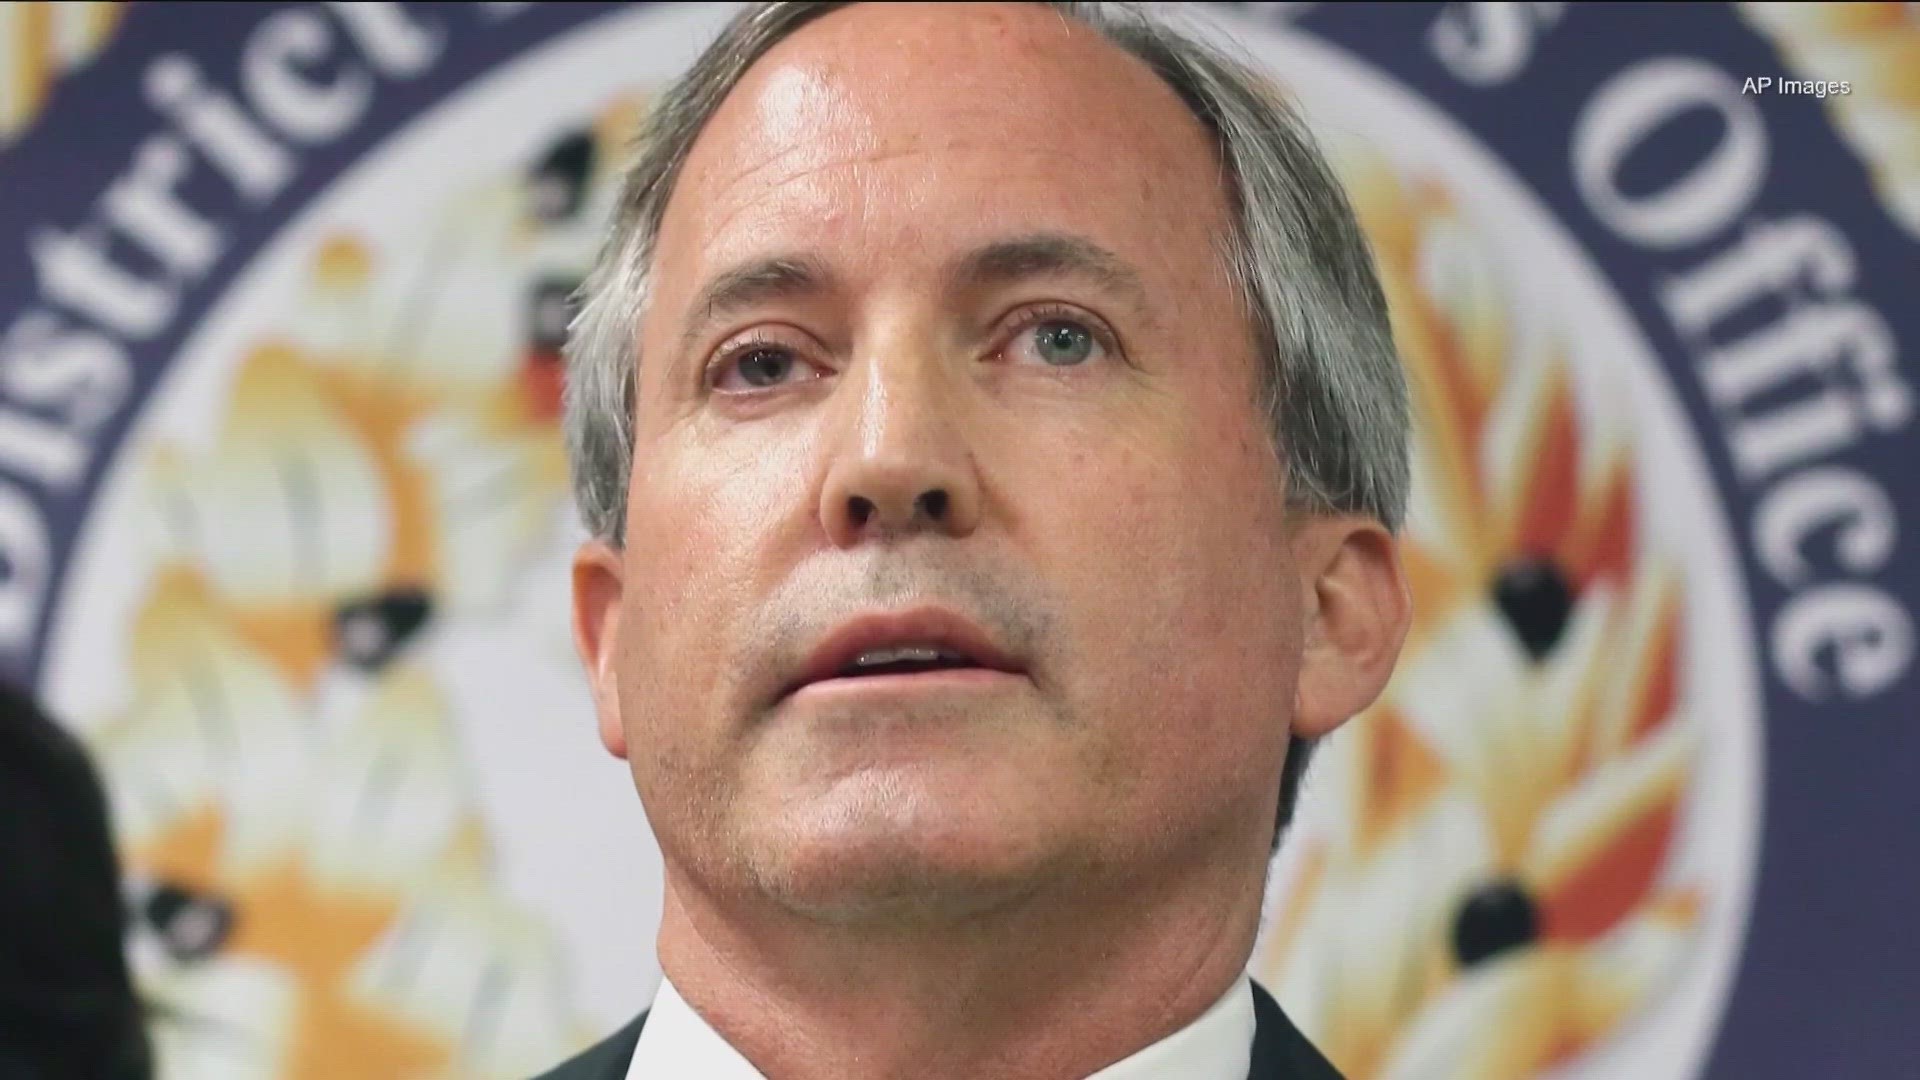 Paxton now faces the prospect of indictment by the full House of Representatives.